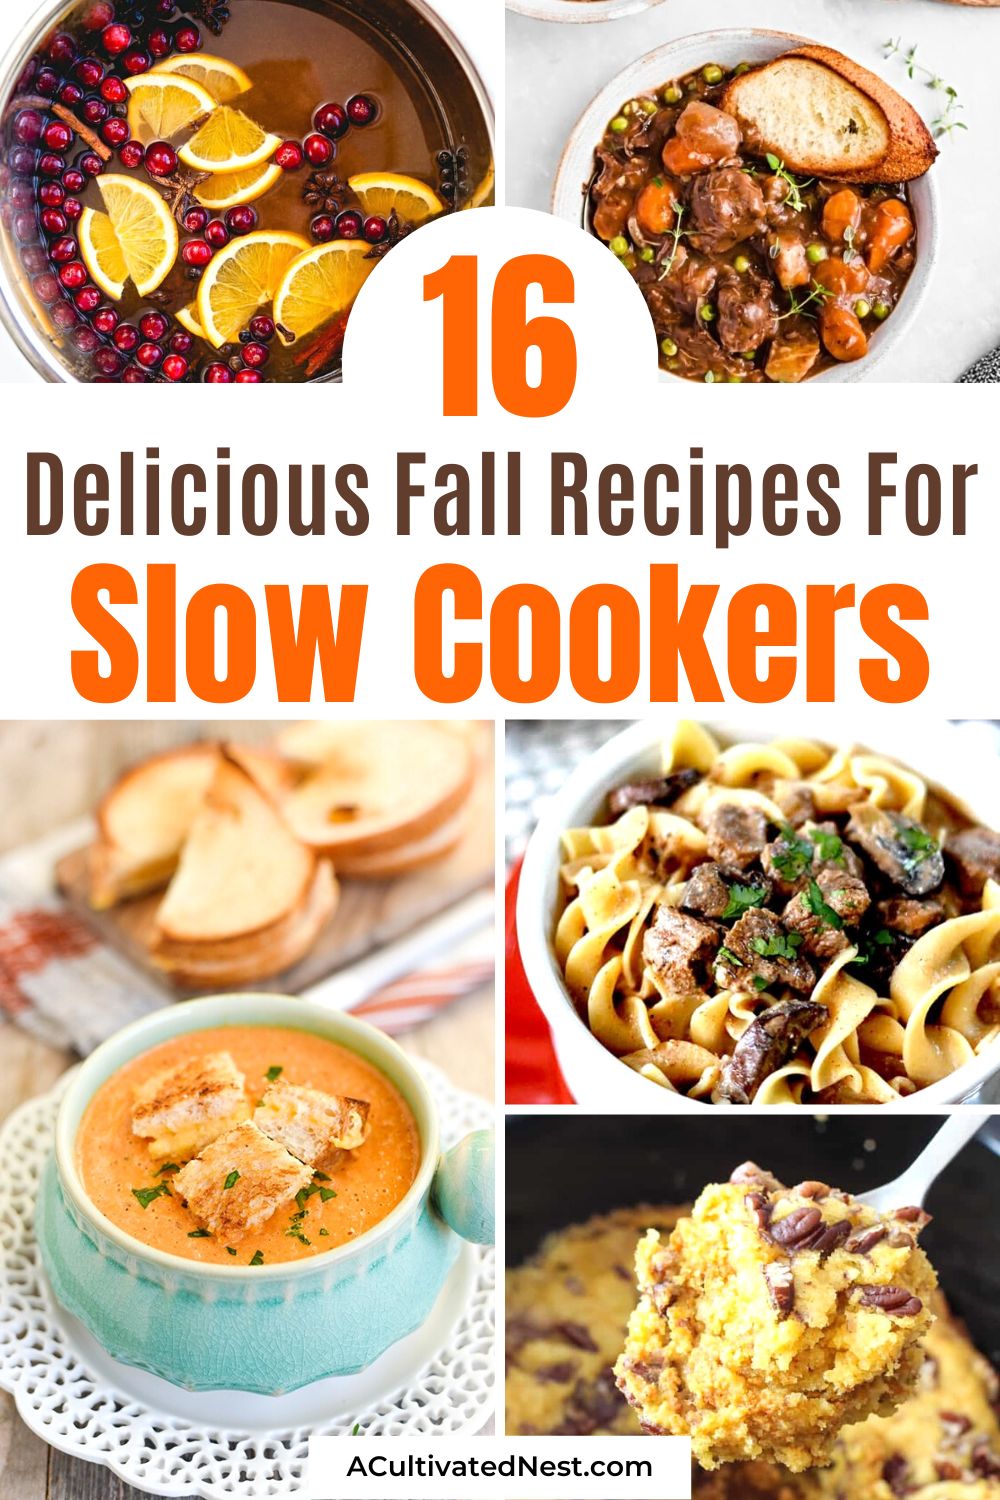 16 Delicious Fall Slow Cooker Recipes- Fall is in the air, and so is the tempting aroma of slow-cooked goodness. Explore our collection of delicious fall slow cooker recipes for comfort food that practically makes itself. Savor the season with ease! | #slowCooker #crockPotRecipes #recipes #dinnerIdeas #ACultivatedNest